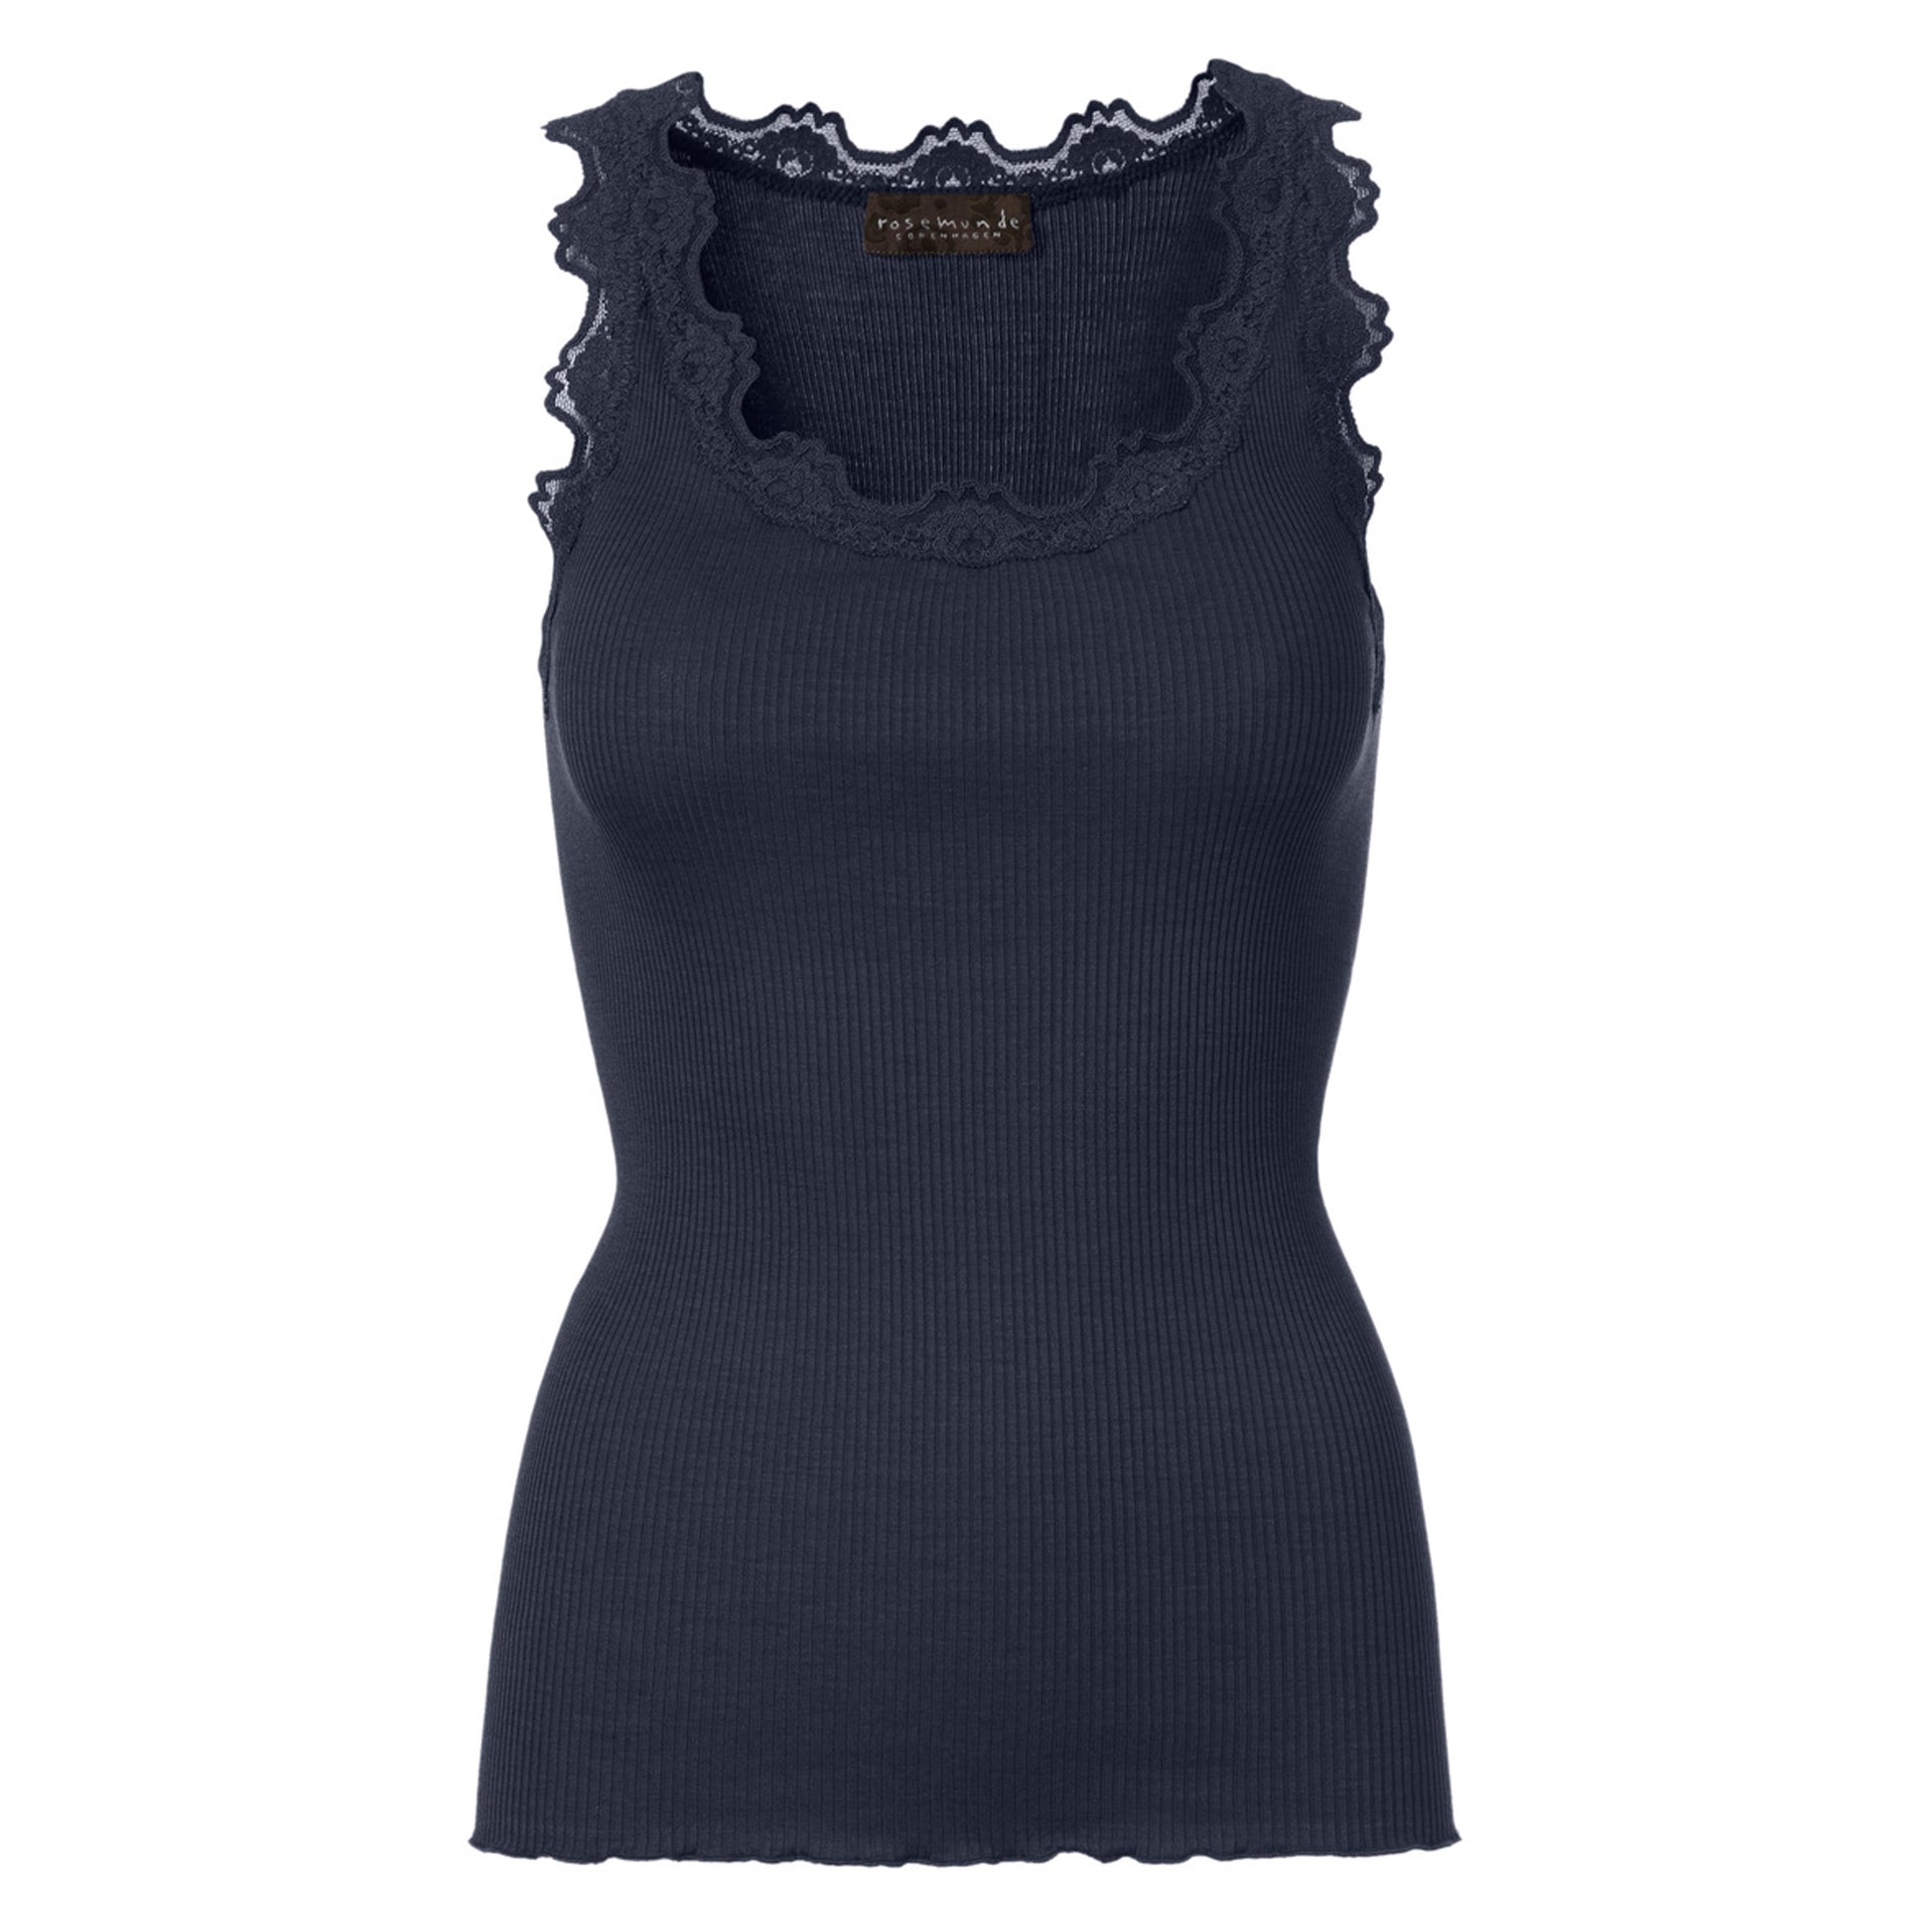 Upgrade your loungewear collection with this Rosemunde women's navy Silk Lace Top featuring signature lace trim.